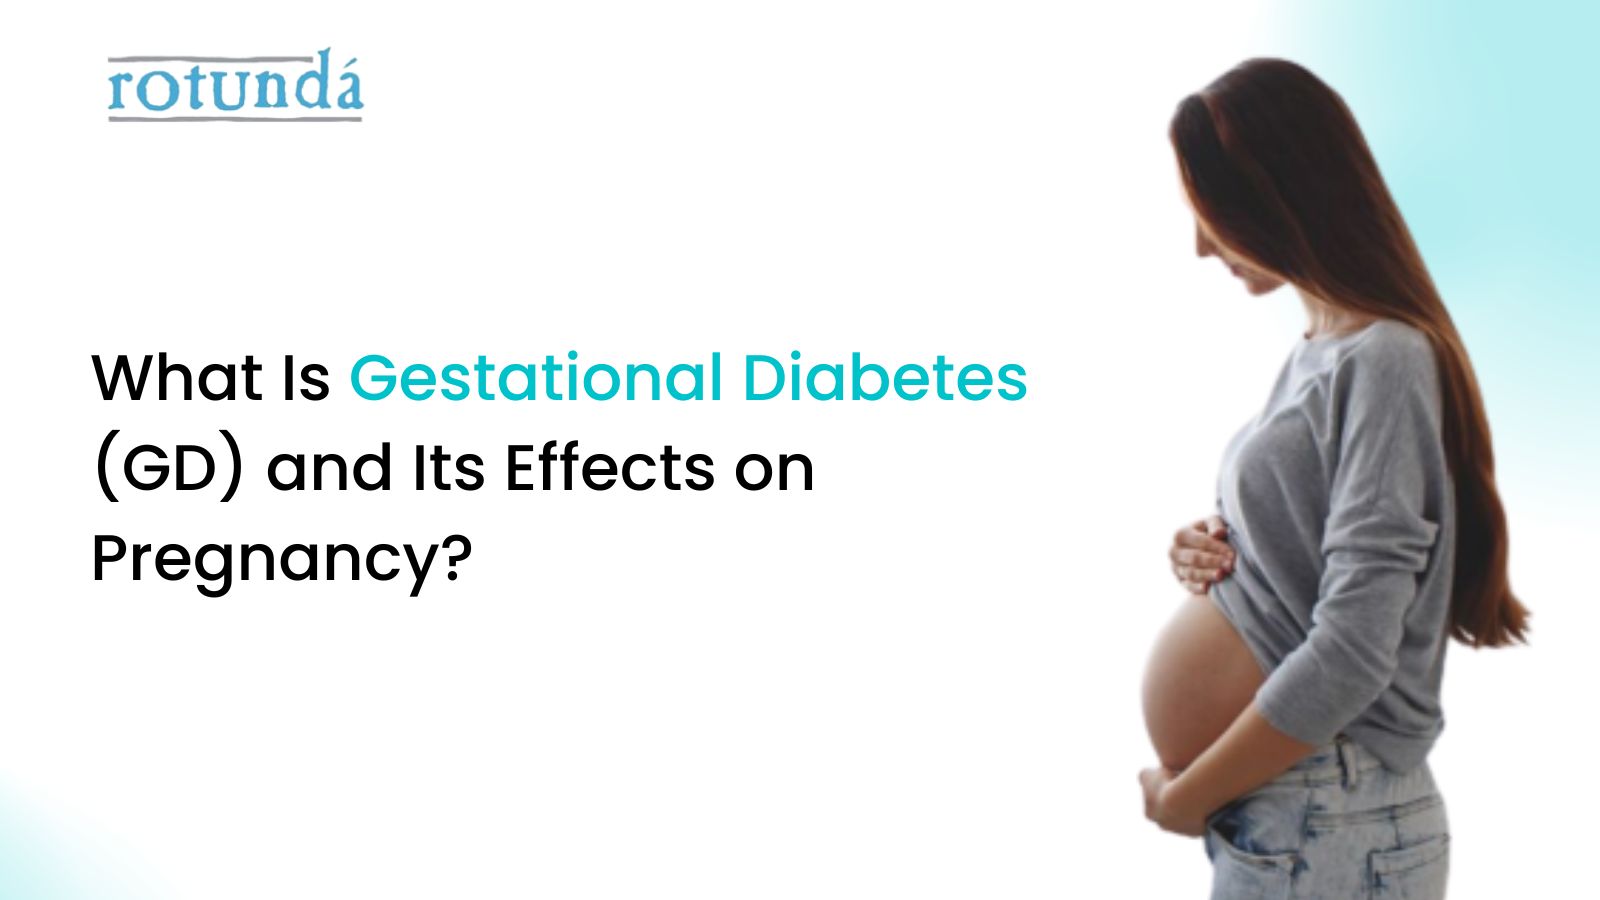 How Gestational Diabetes Can Impact Your Pregnancy